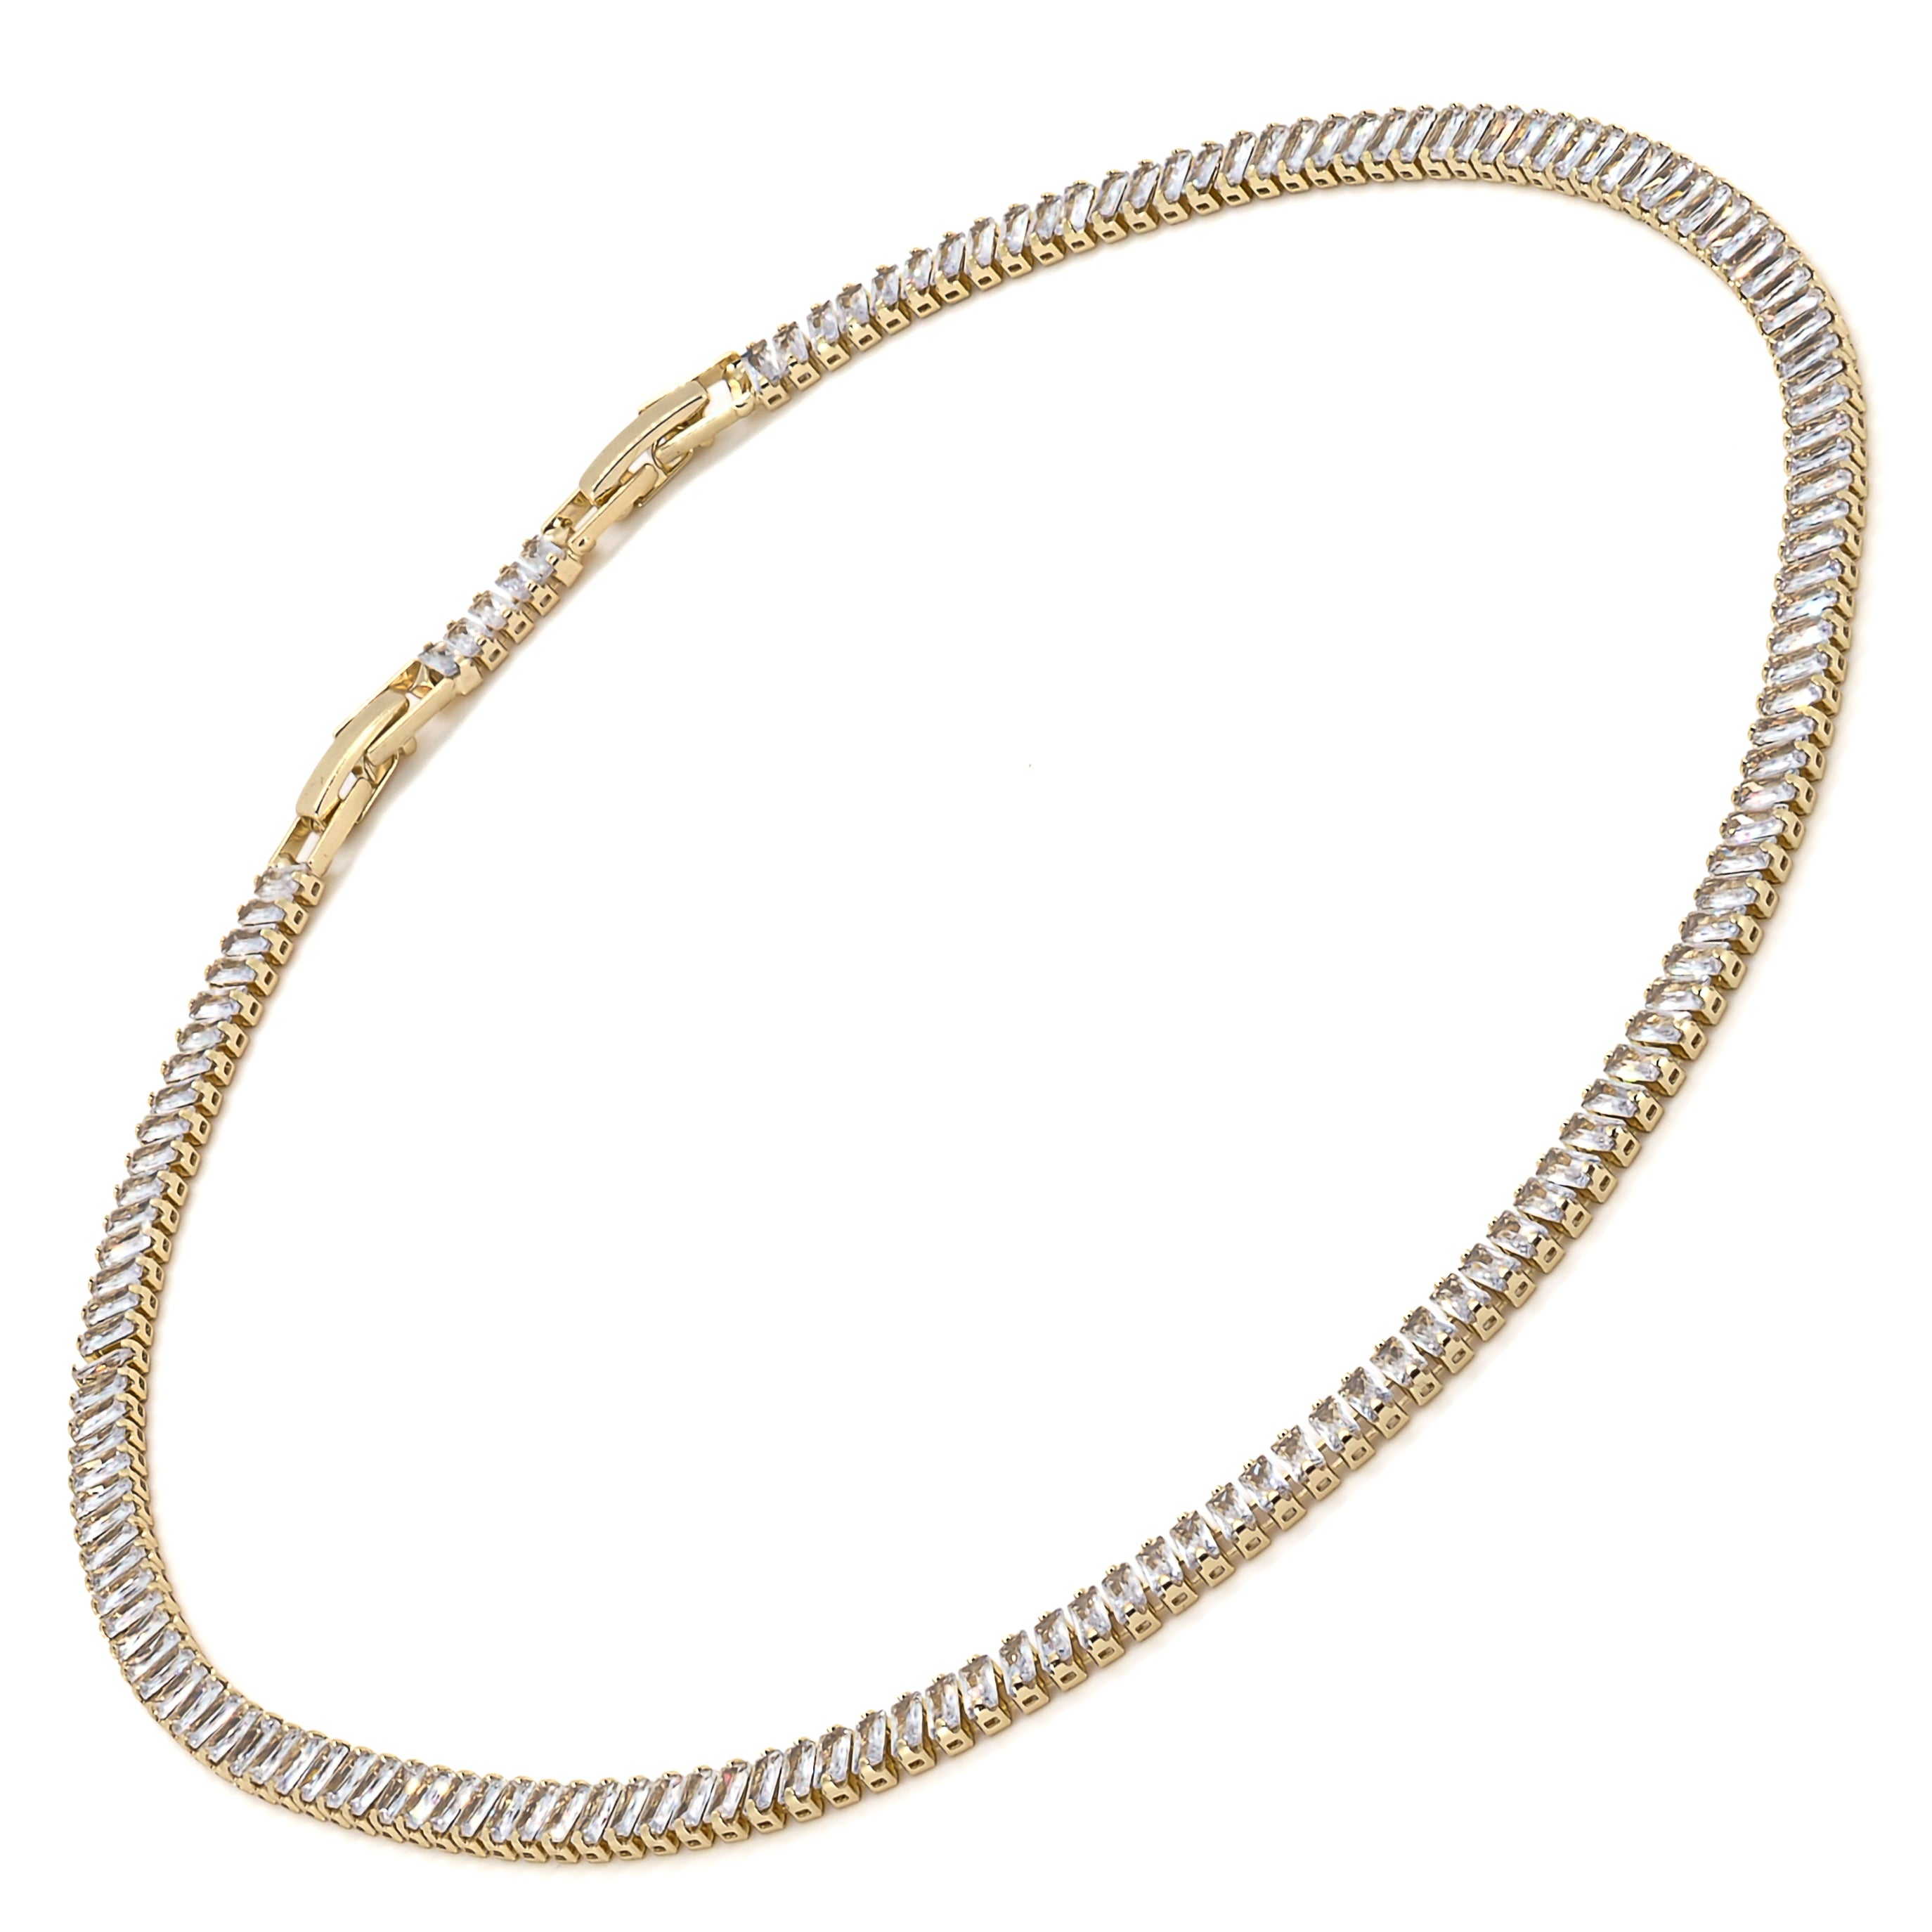 Stunning Baguette Diamond Gold Choker Necklace with CZ Diamonds, a harmonious blend of luxury and style.